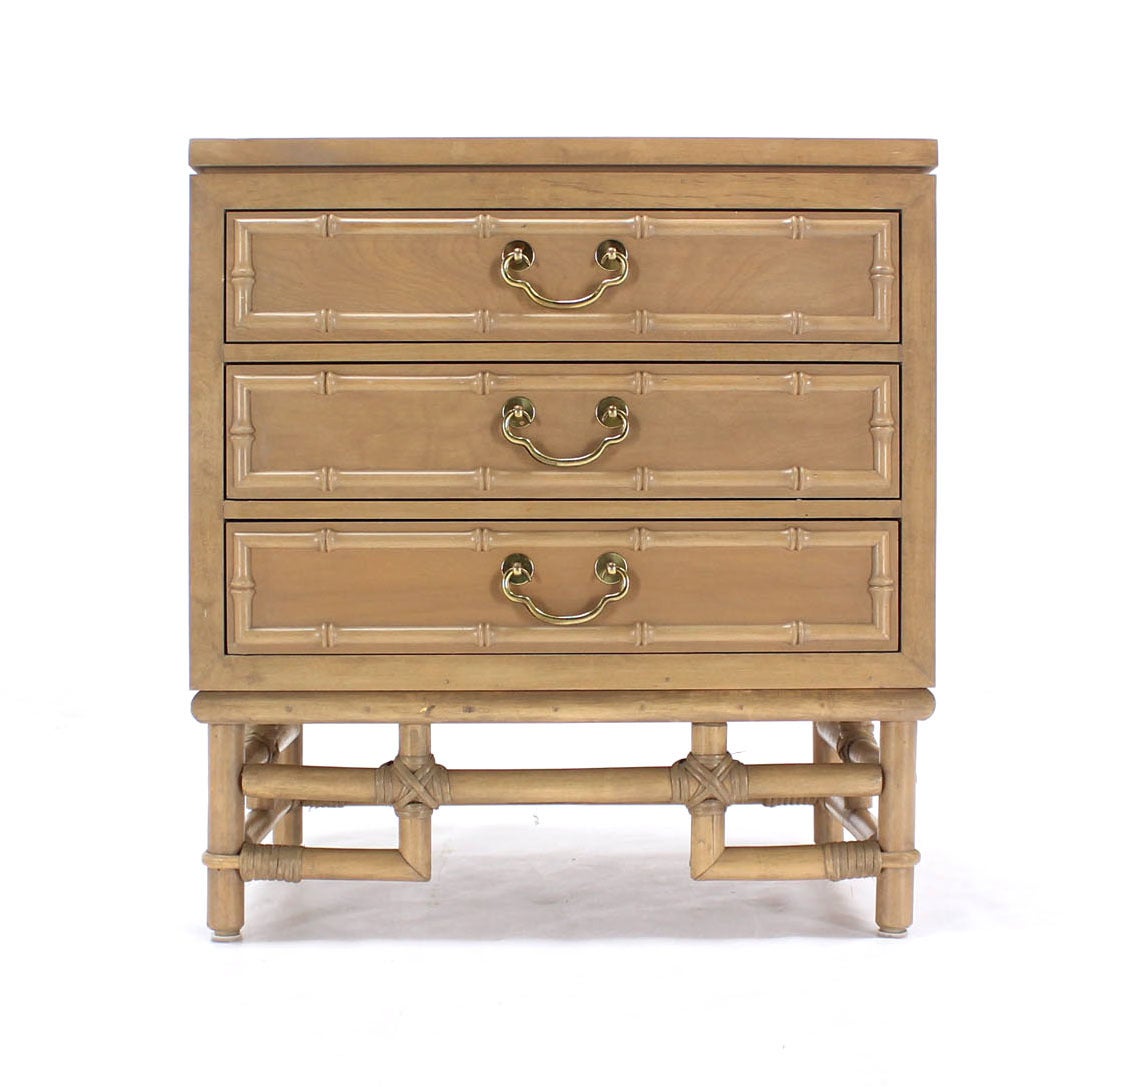 Faux bamboo Oriental modern petite chest or dresser.